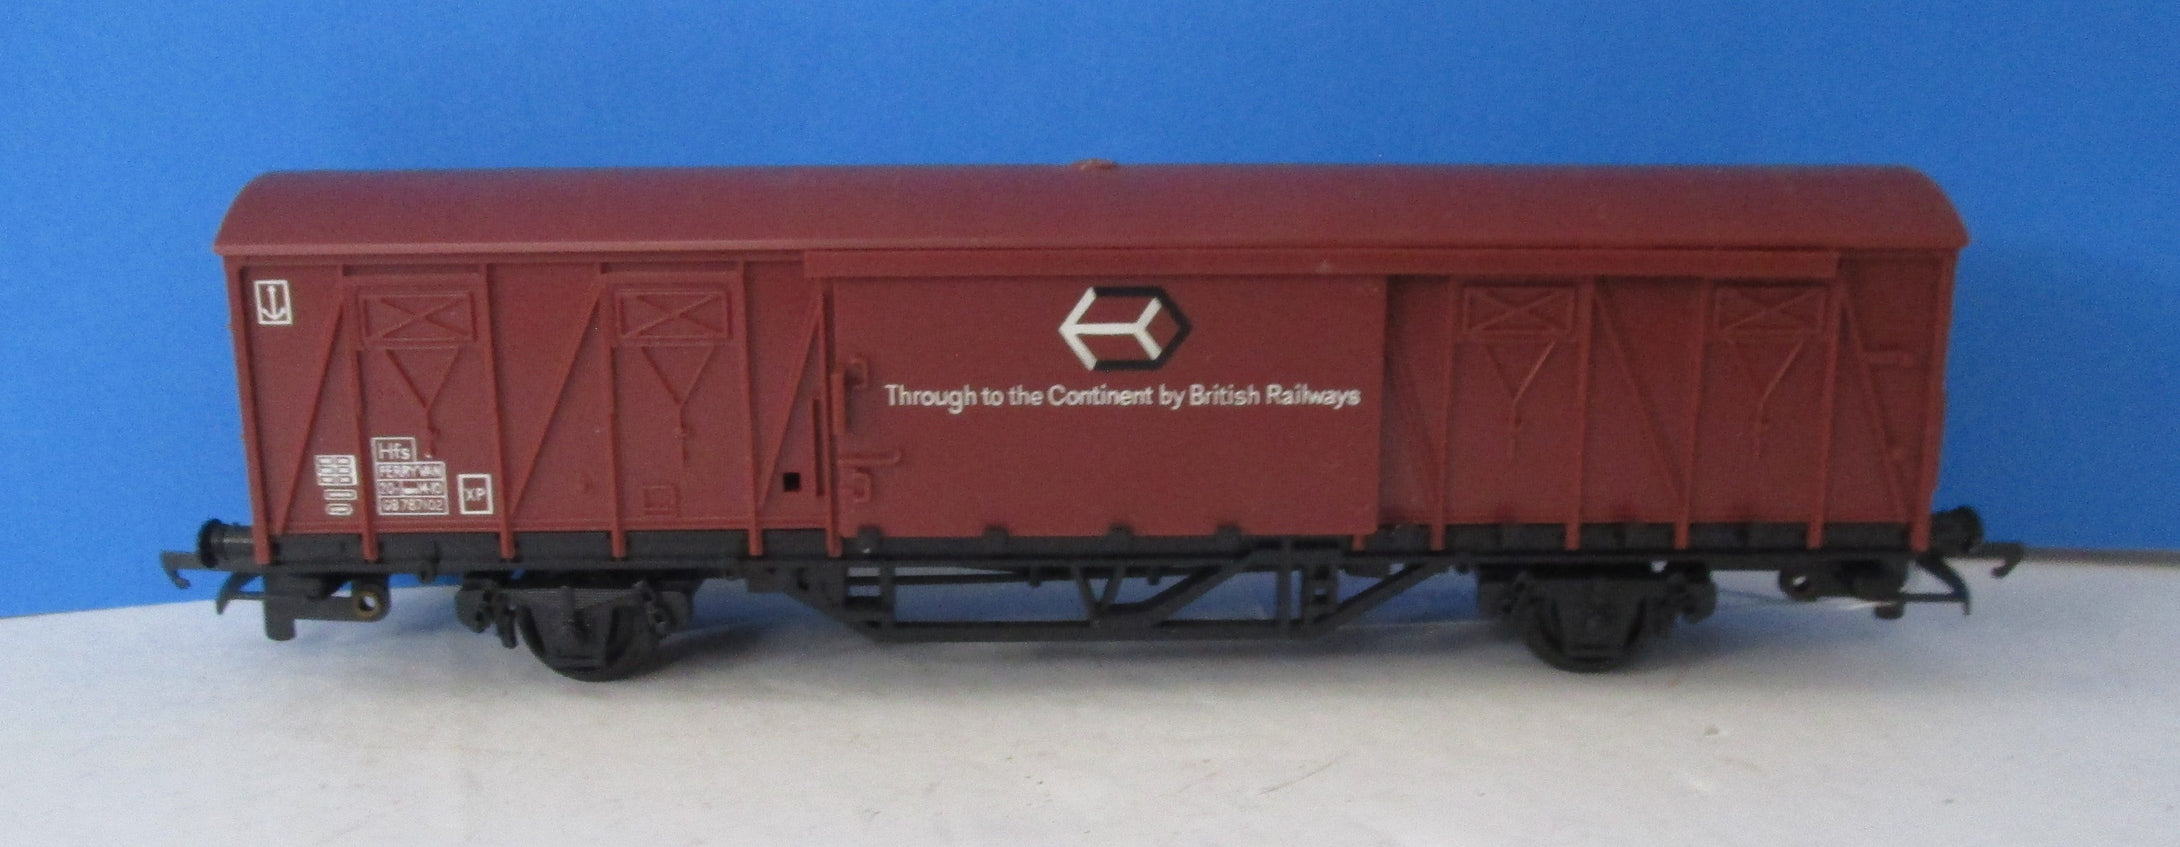 R738 HORNBY Anglo Continental Ferry Van GB787102 - BOXED